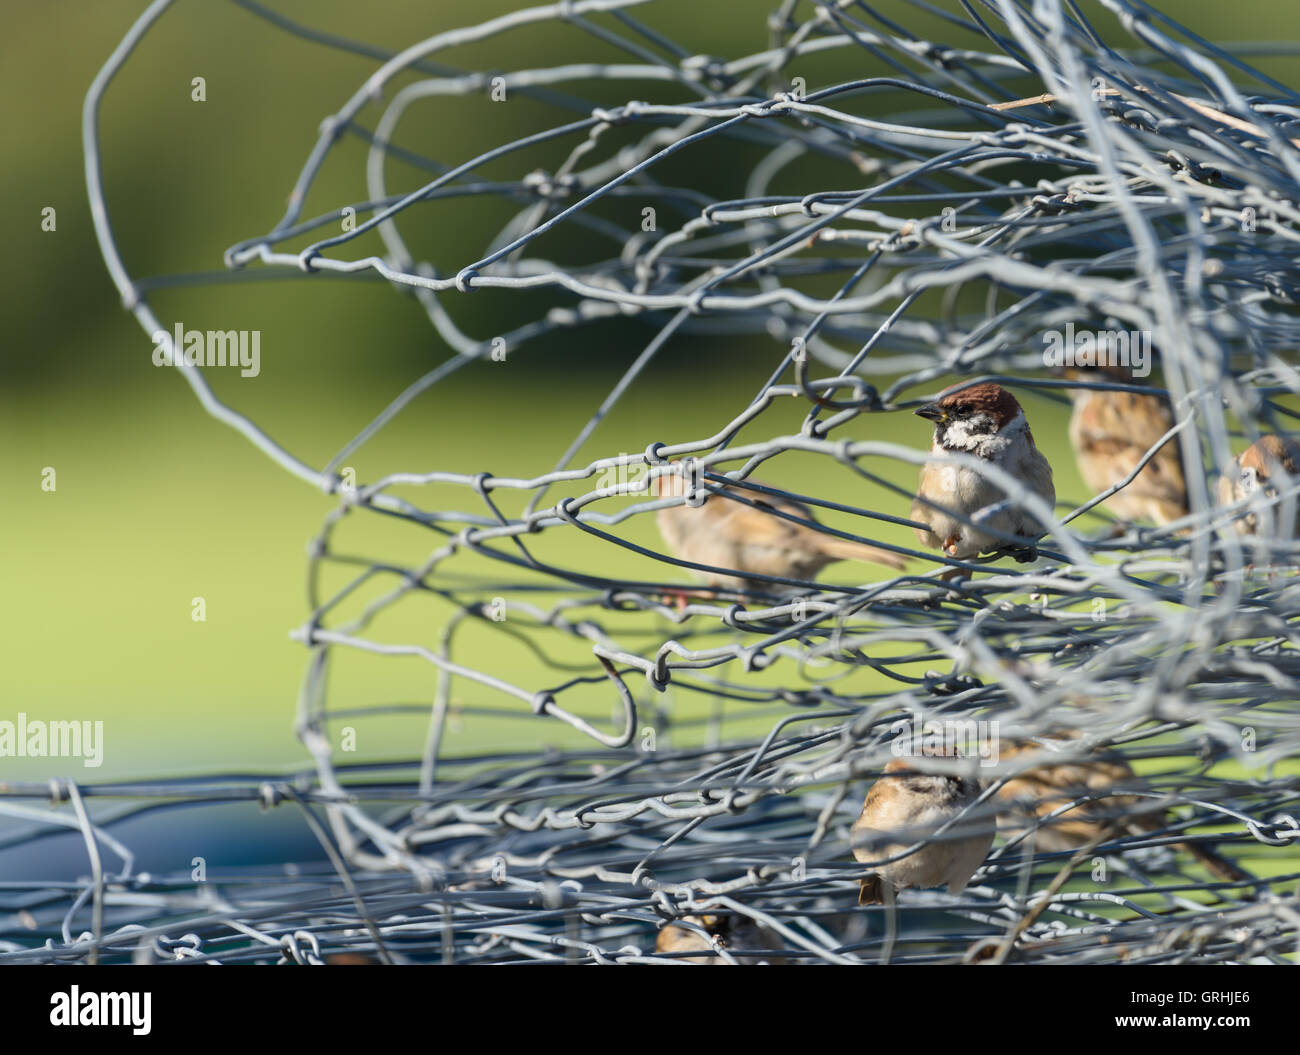 Sparrows sitting inside twisted mesh fence Stock Photo